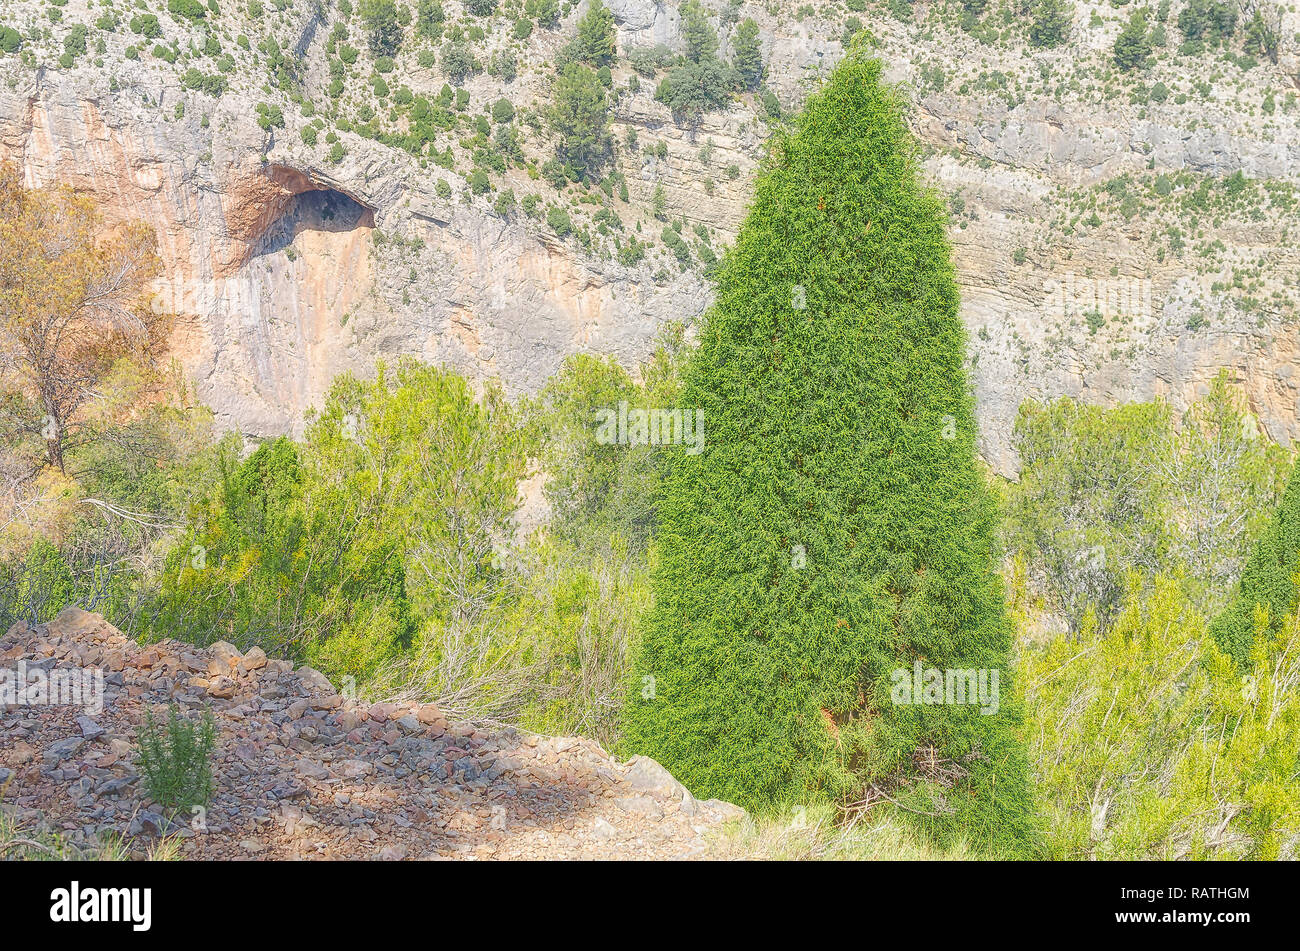 Juniperus thurifera. Young specimen of spanish juniper tree. Leaves of vivid green color. Mediterranean scenery with a canyon at the background. Stock Photo